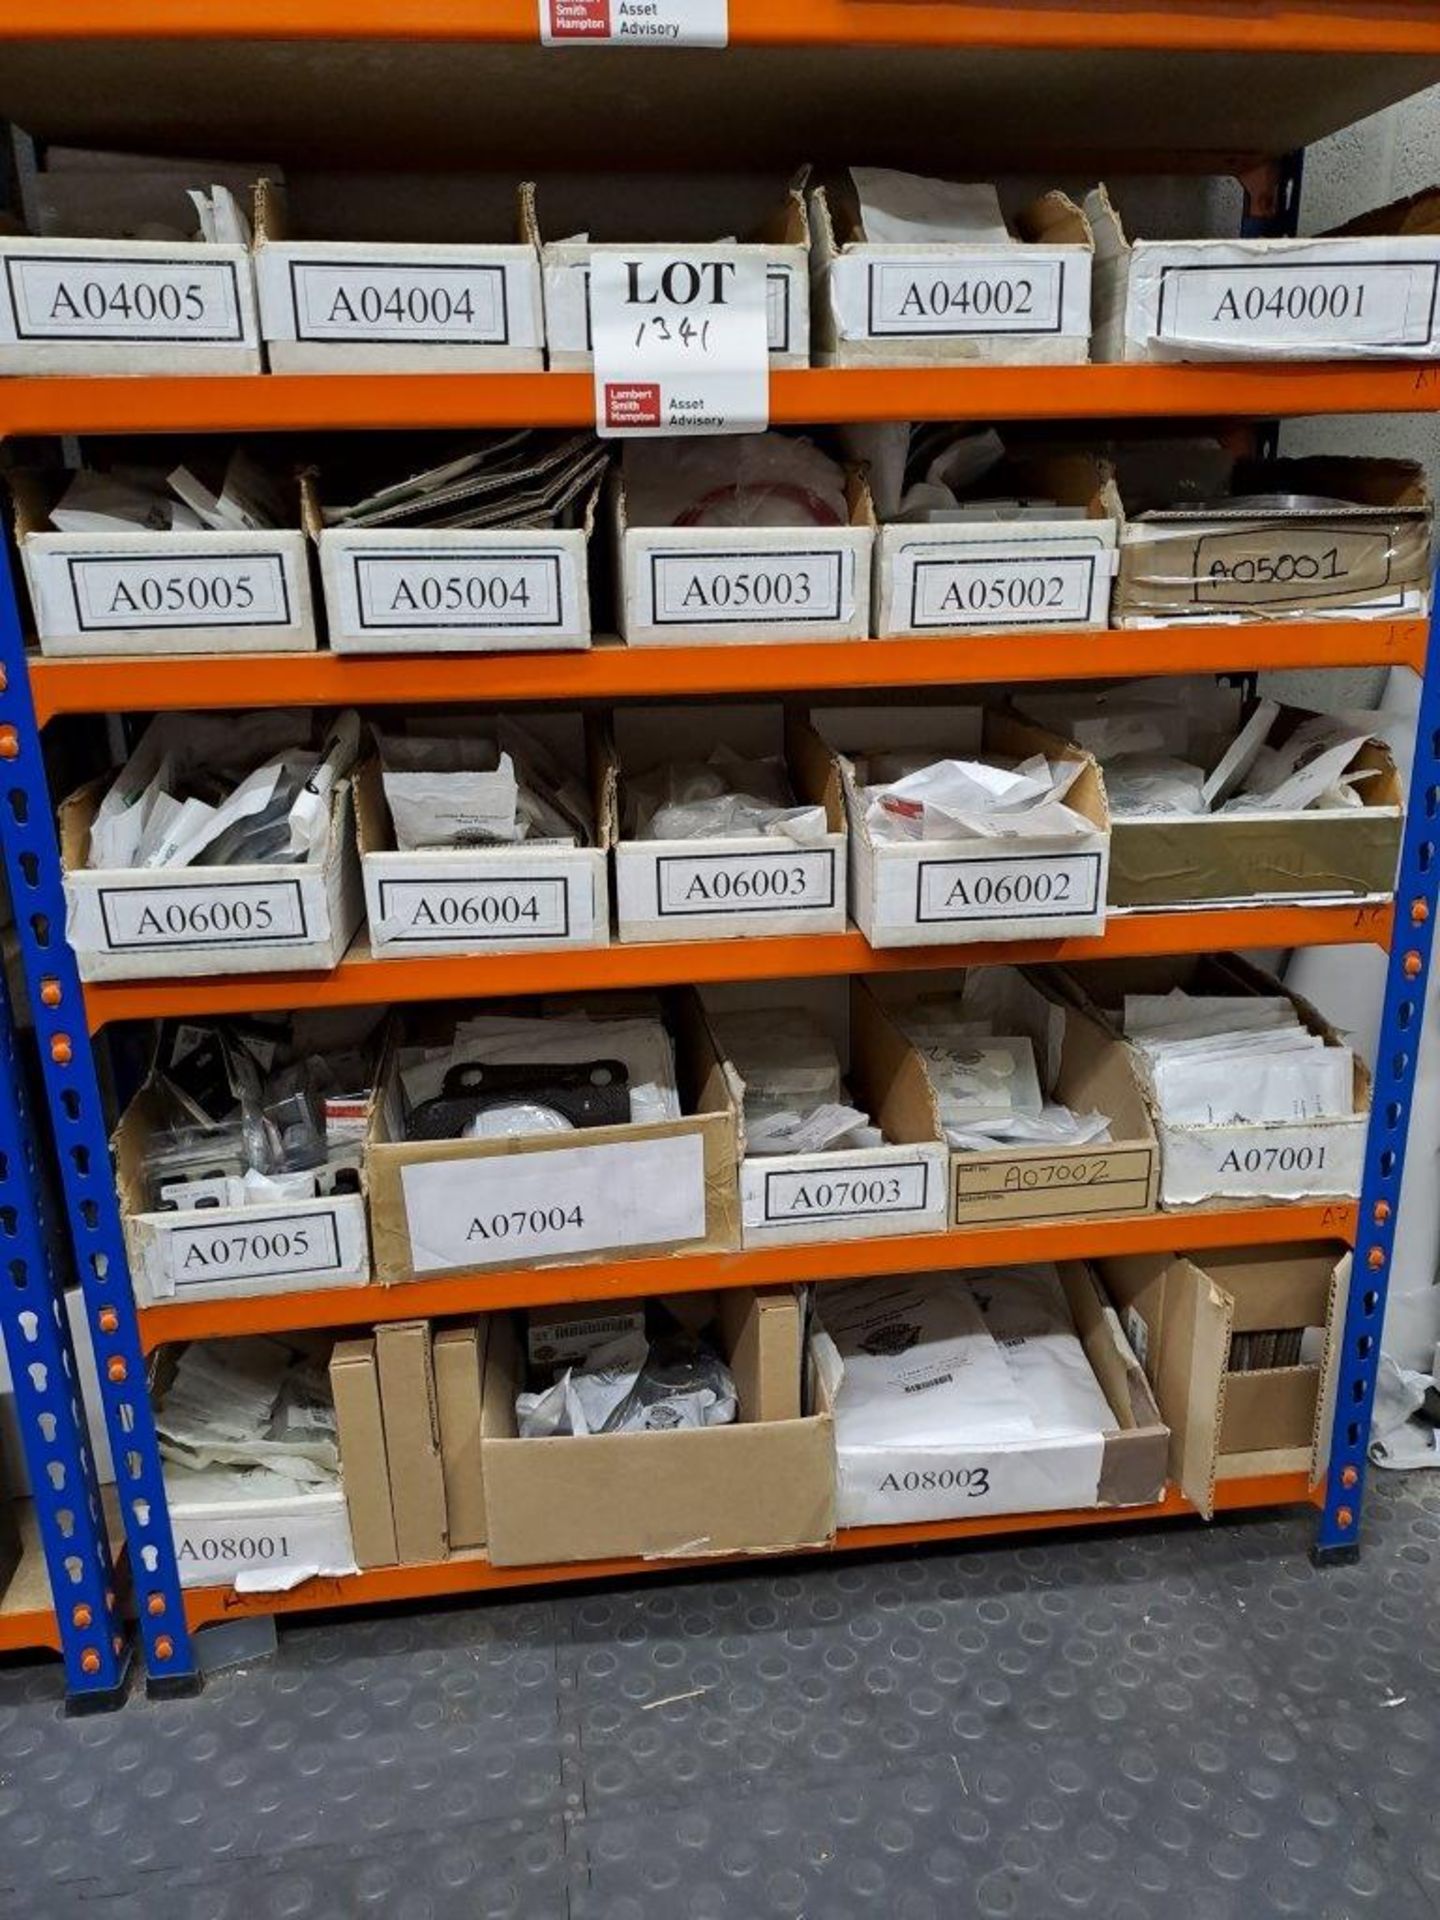 Quantity of Harley Davidson parts, to 5 shelves as pictured